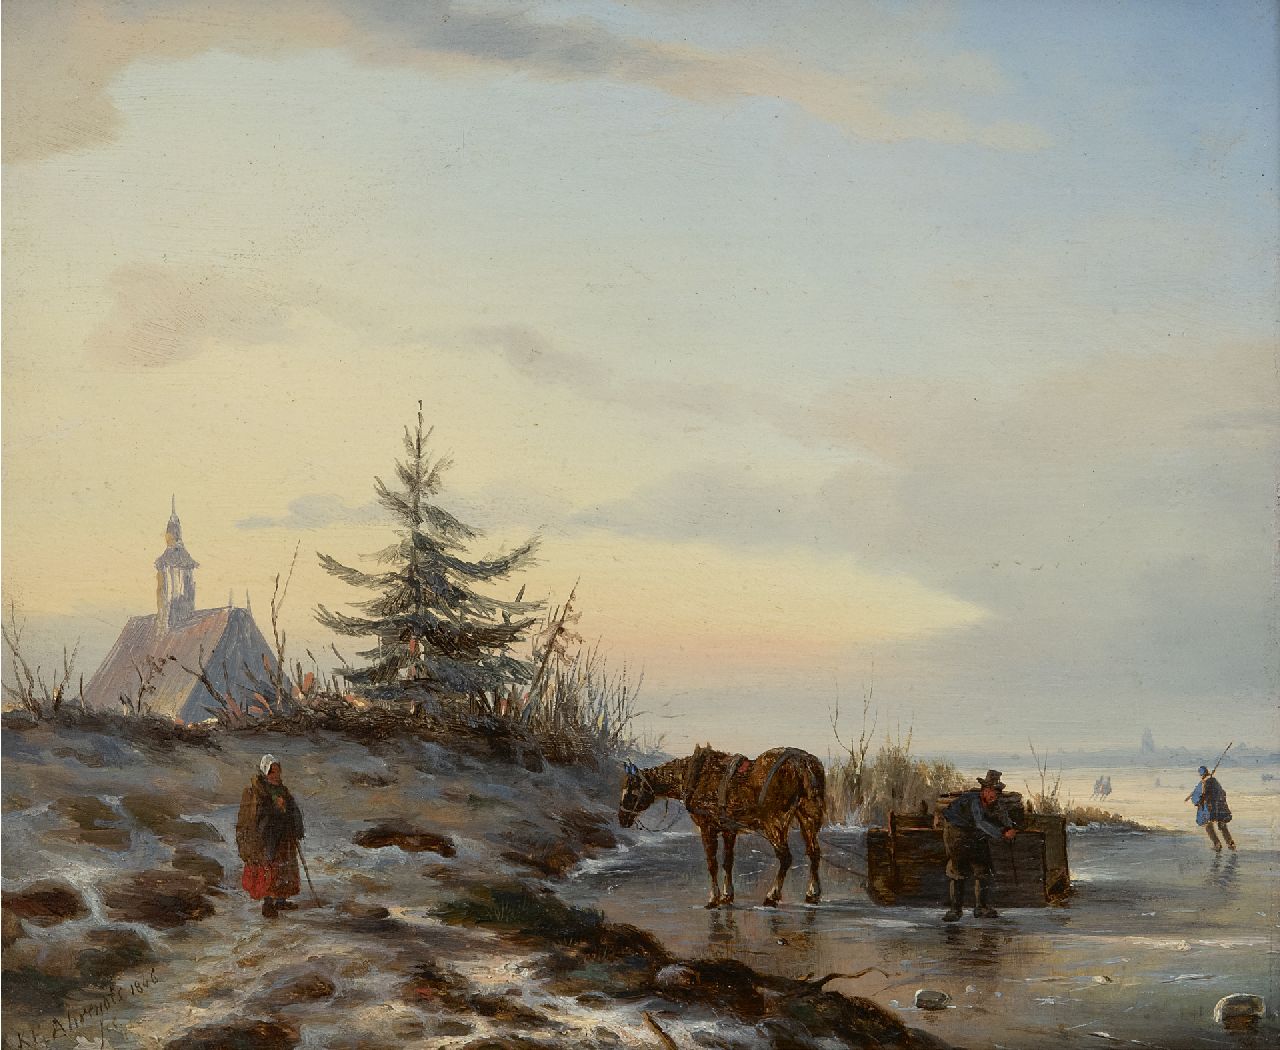 Ahrendts C.E.  | Carl Eduard Ahrendts, Horse and sledge on a frozen river, oil on panel 27.8 x 24.4 cm, signed l.l. and dated 1846